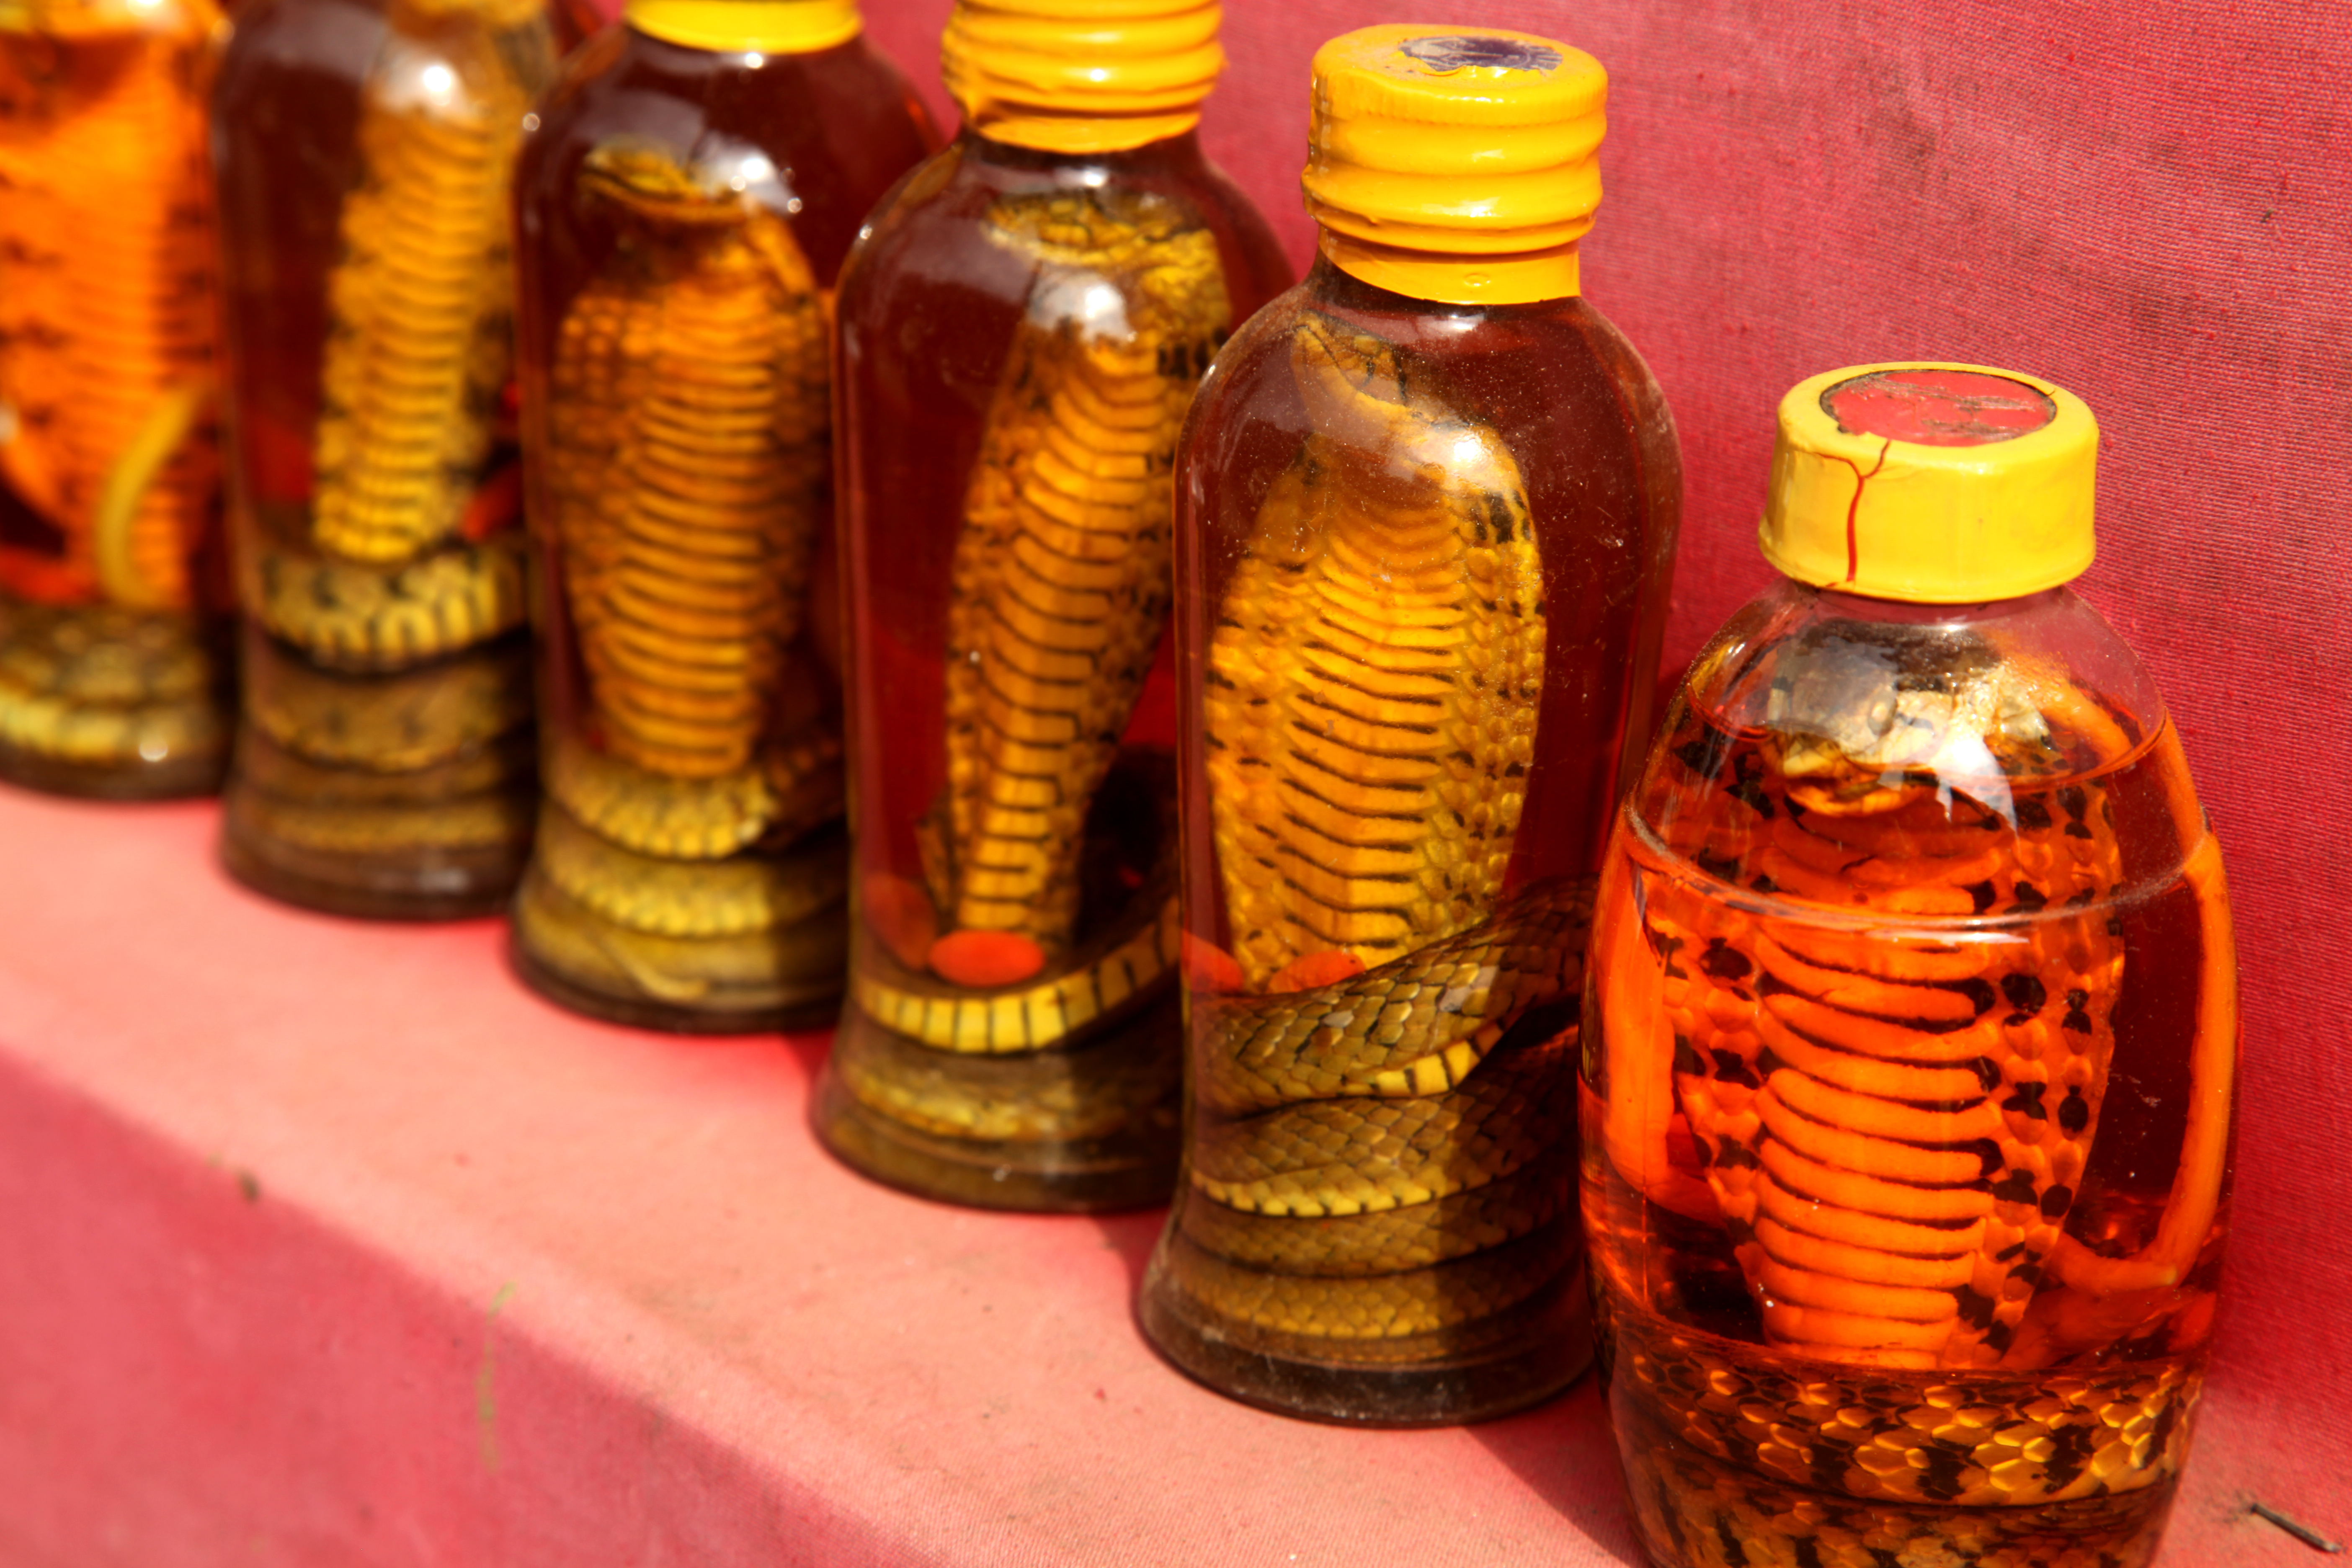 Ancient Chinese Medicine - Curing Cancer